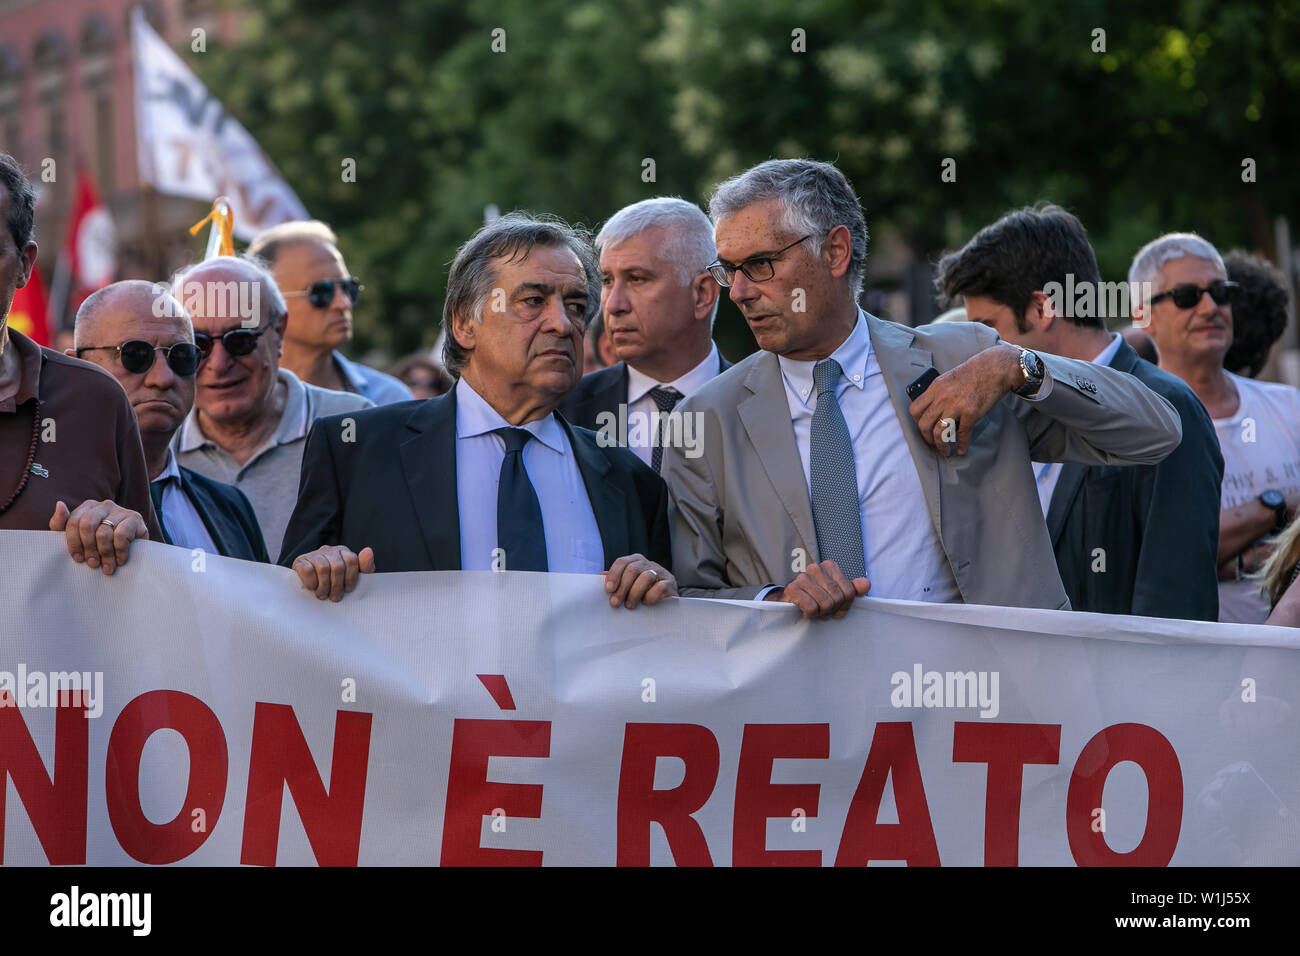 Palermo, Italy. 02nd July, 2019. Leoluca Orlando, mayor of Palermo, during the demonstration to show support for Sea Watch captain Carola Rakete. Credit: Antonio Melita/Pacific Press/Alamy Live News Stock Photo